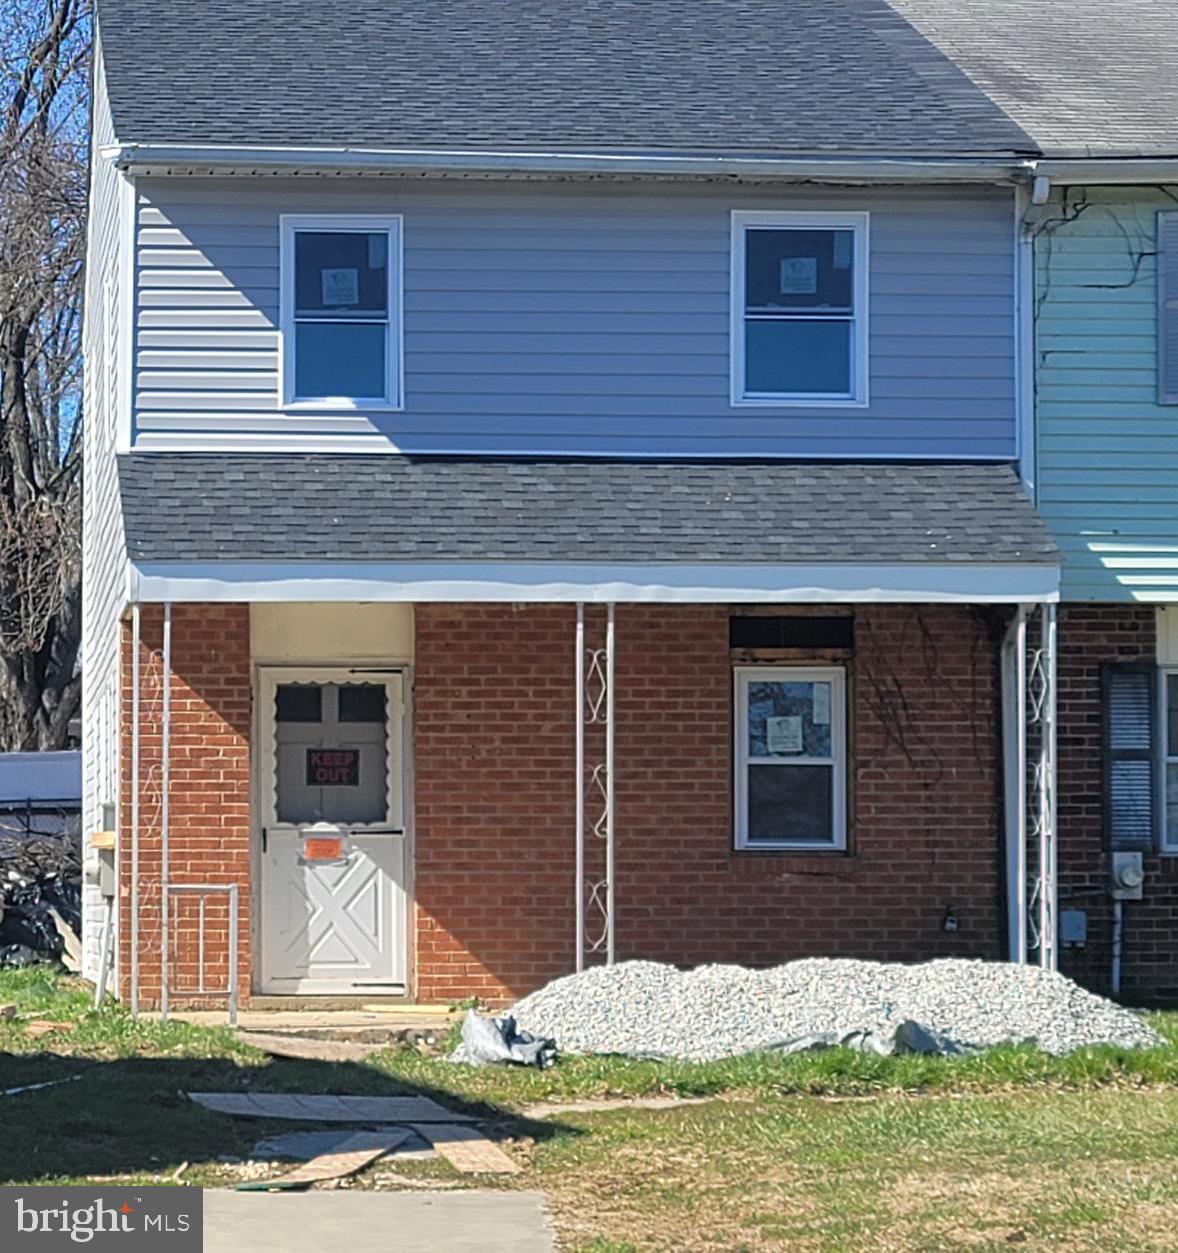 Welcome to 28 Maple Court in Elkton, MD, where you have the chance to start from scratch and build y